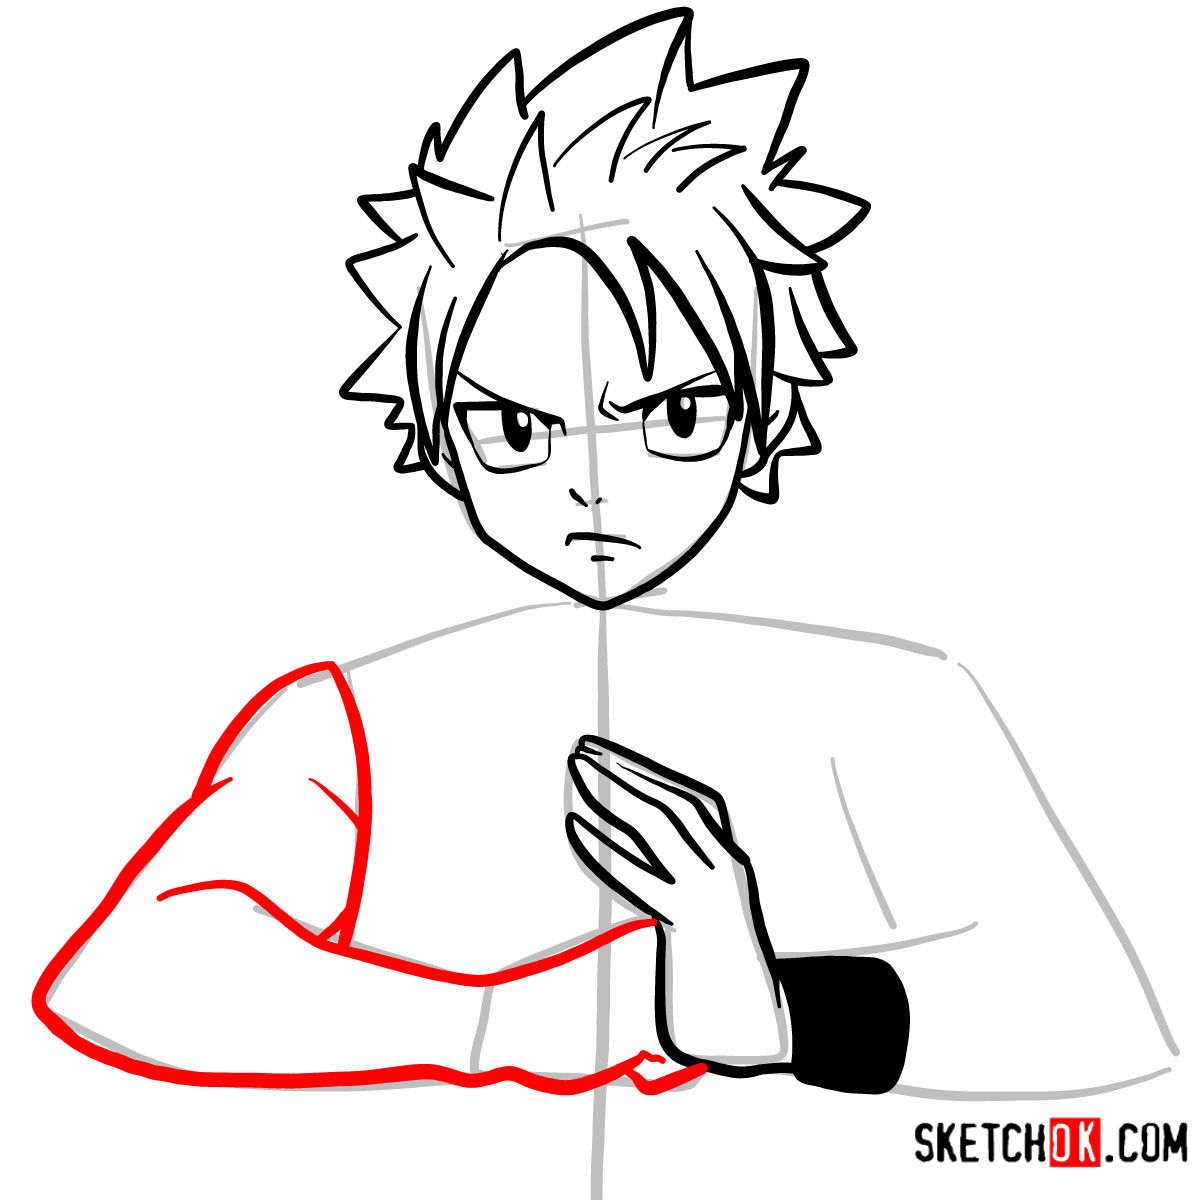 How to draw Natsu Dragneel's face | Fairy Tail - step 07